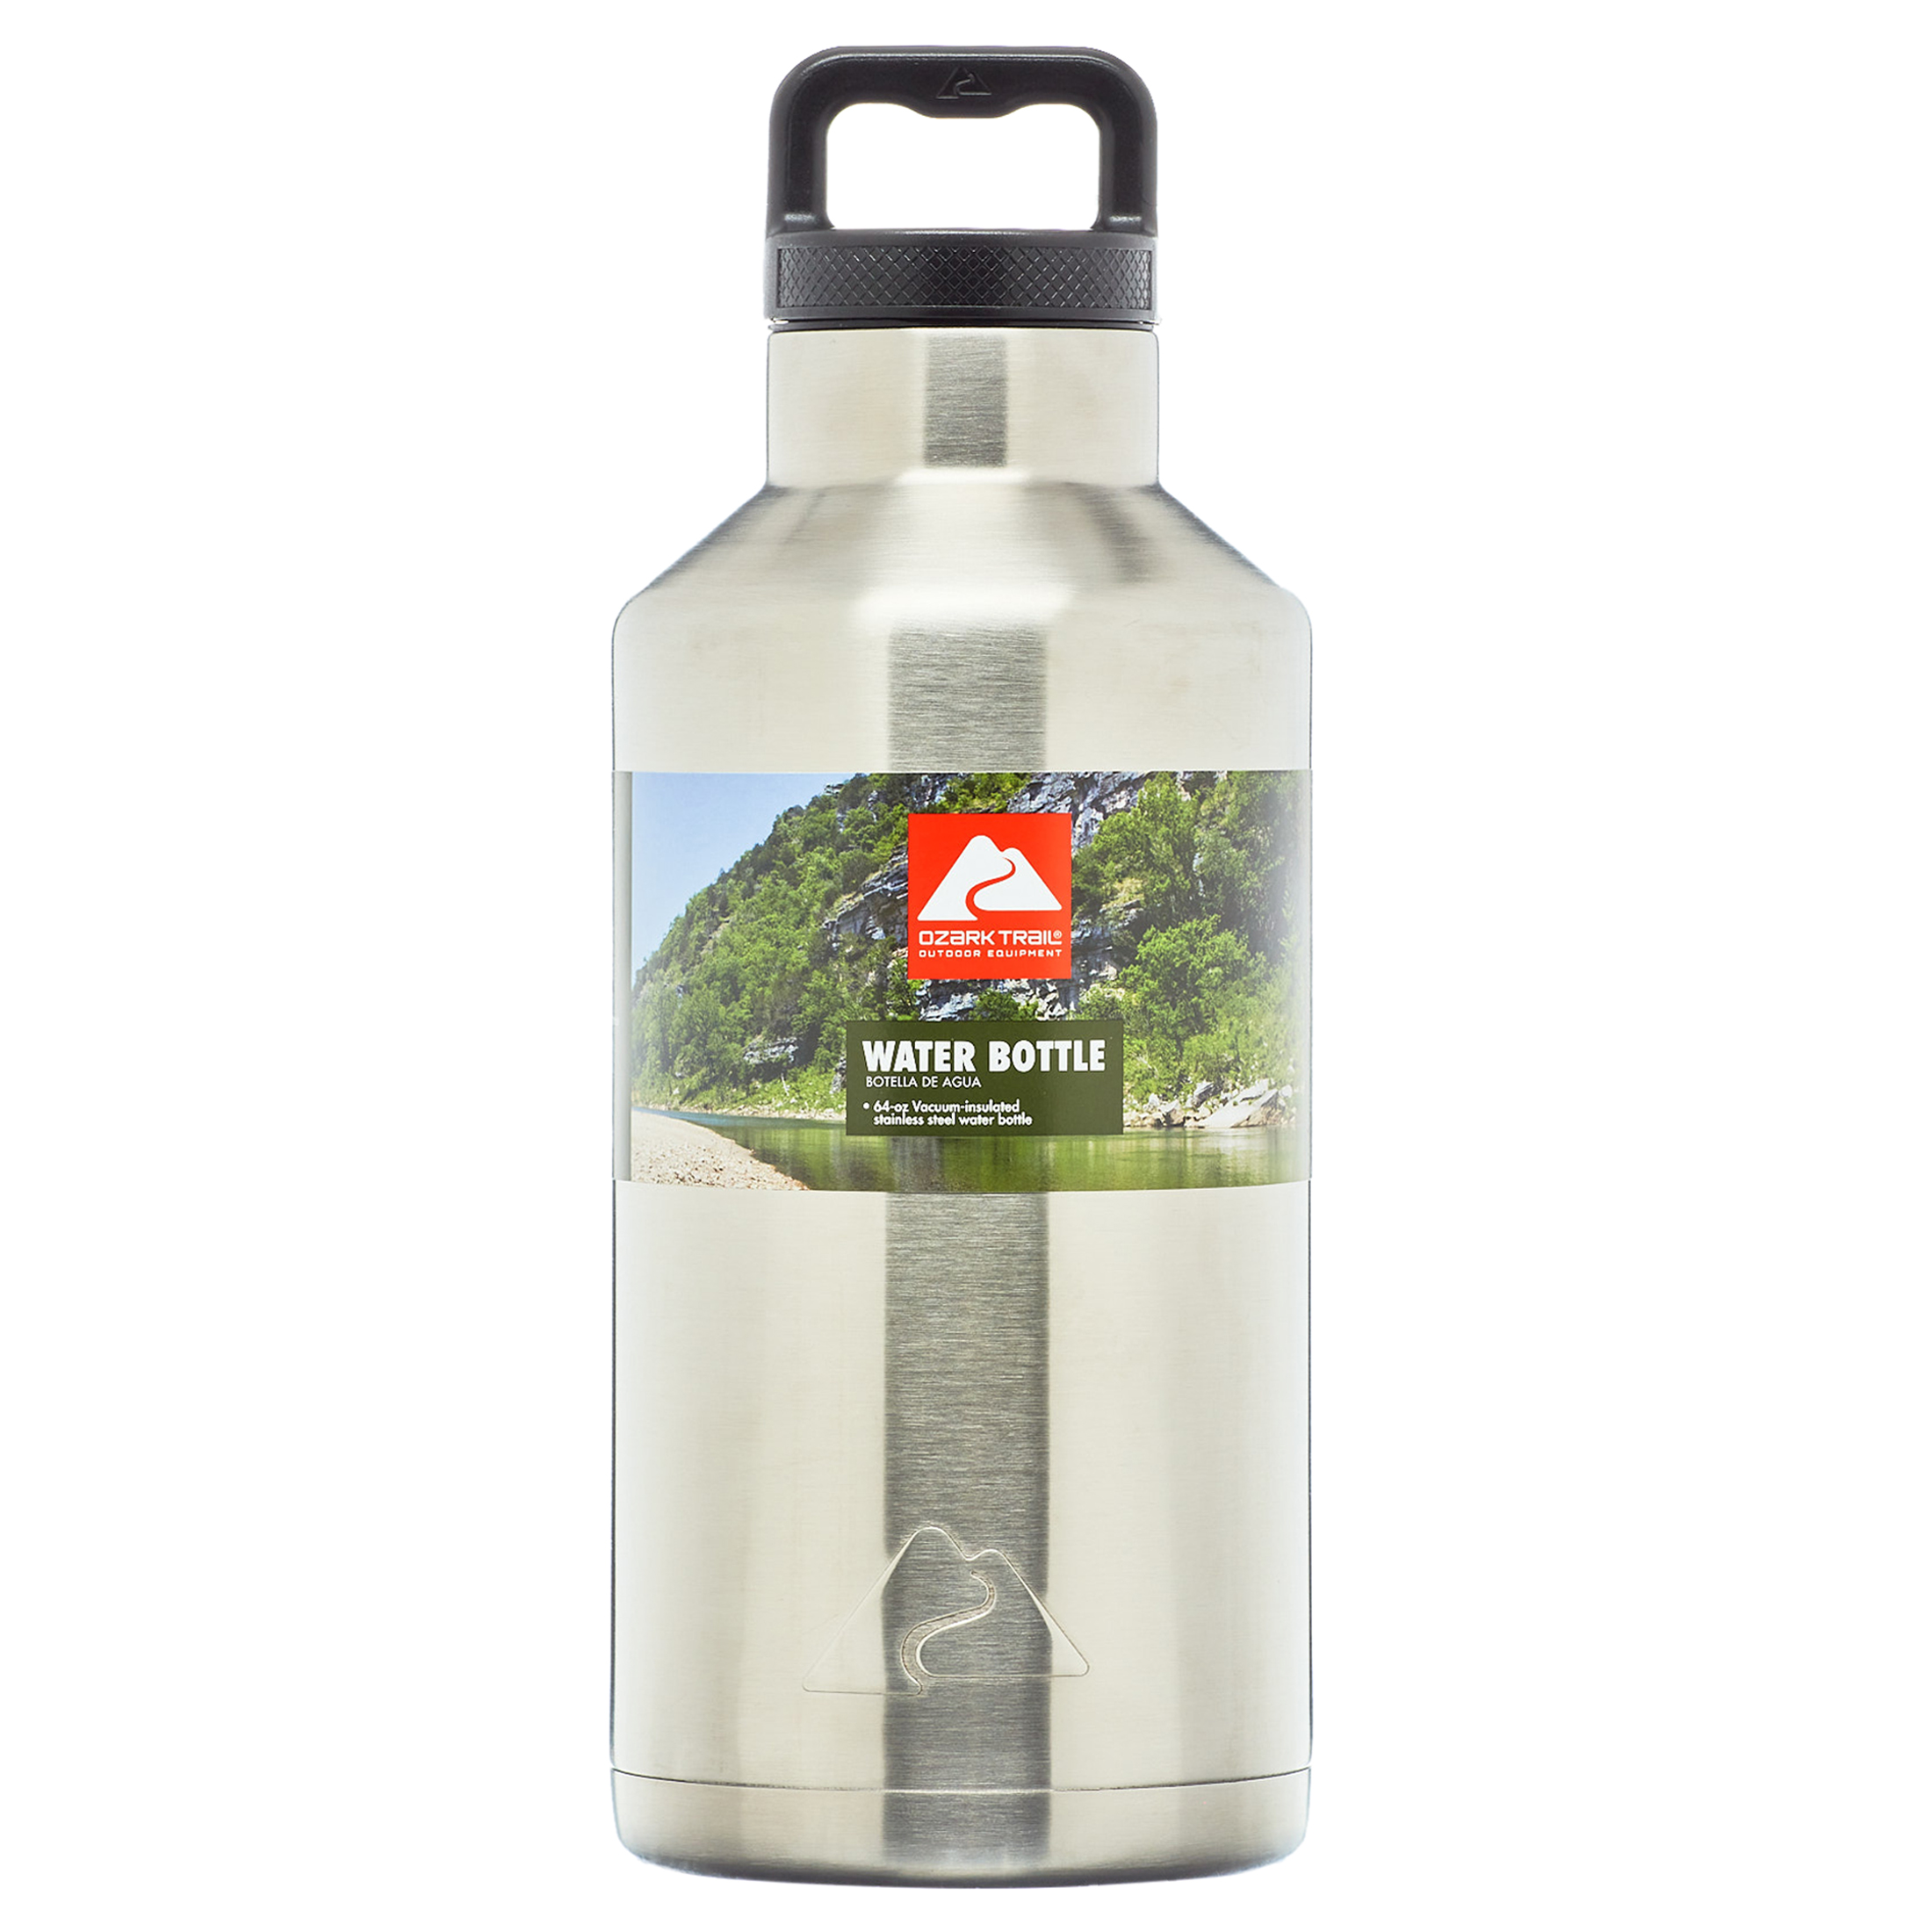 Ozark Trail Double Wall Stainless Steel Water Bottle - image 1 of 7